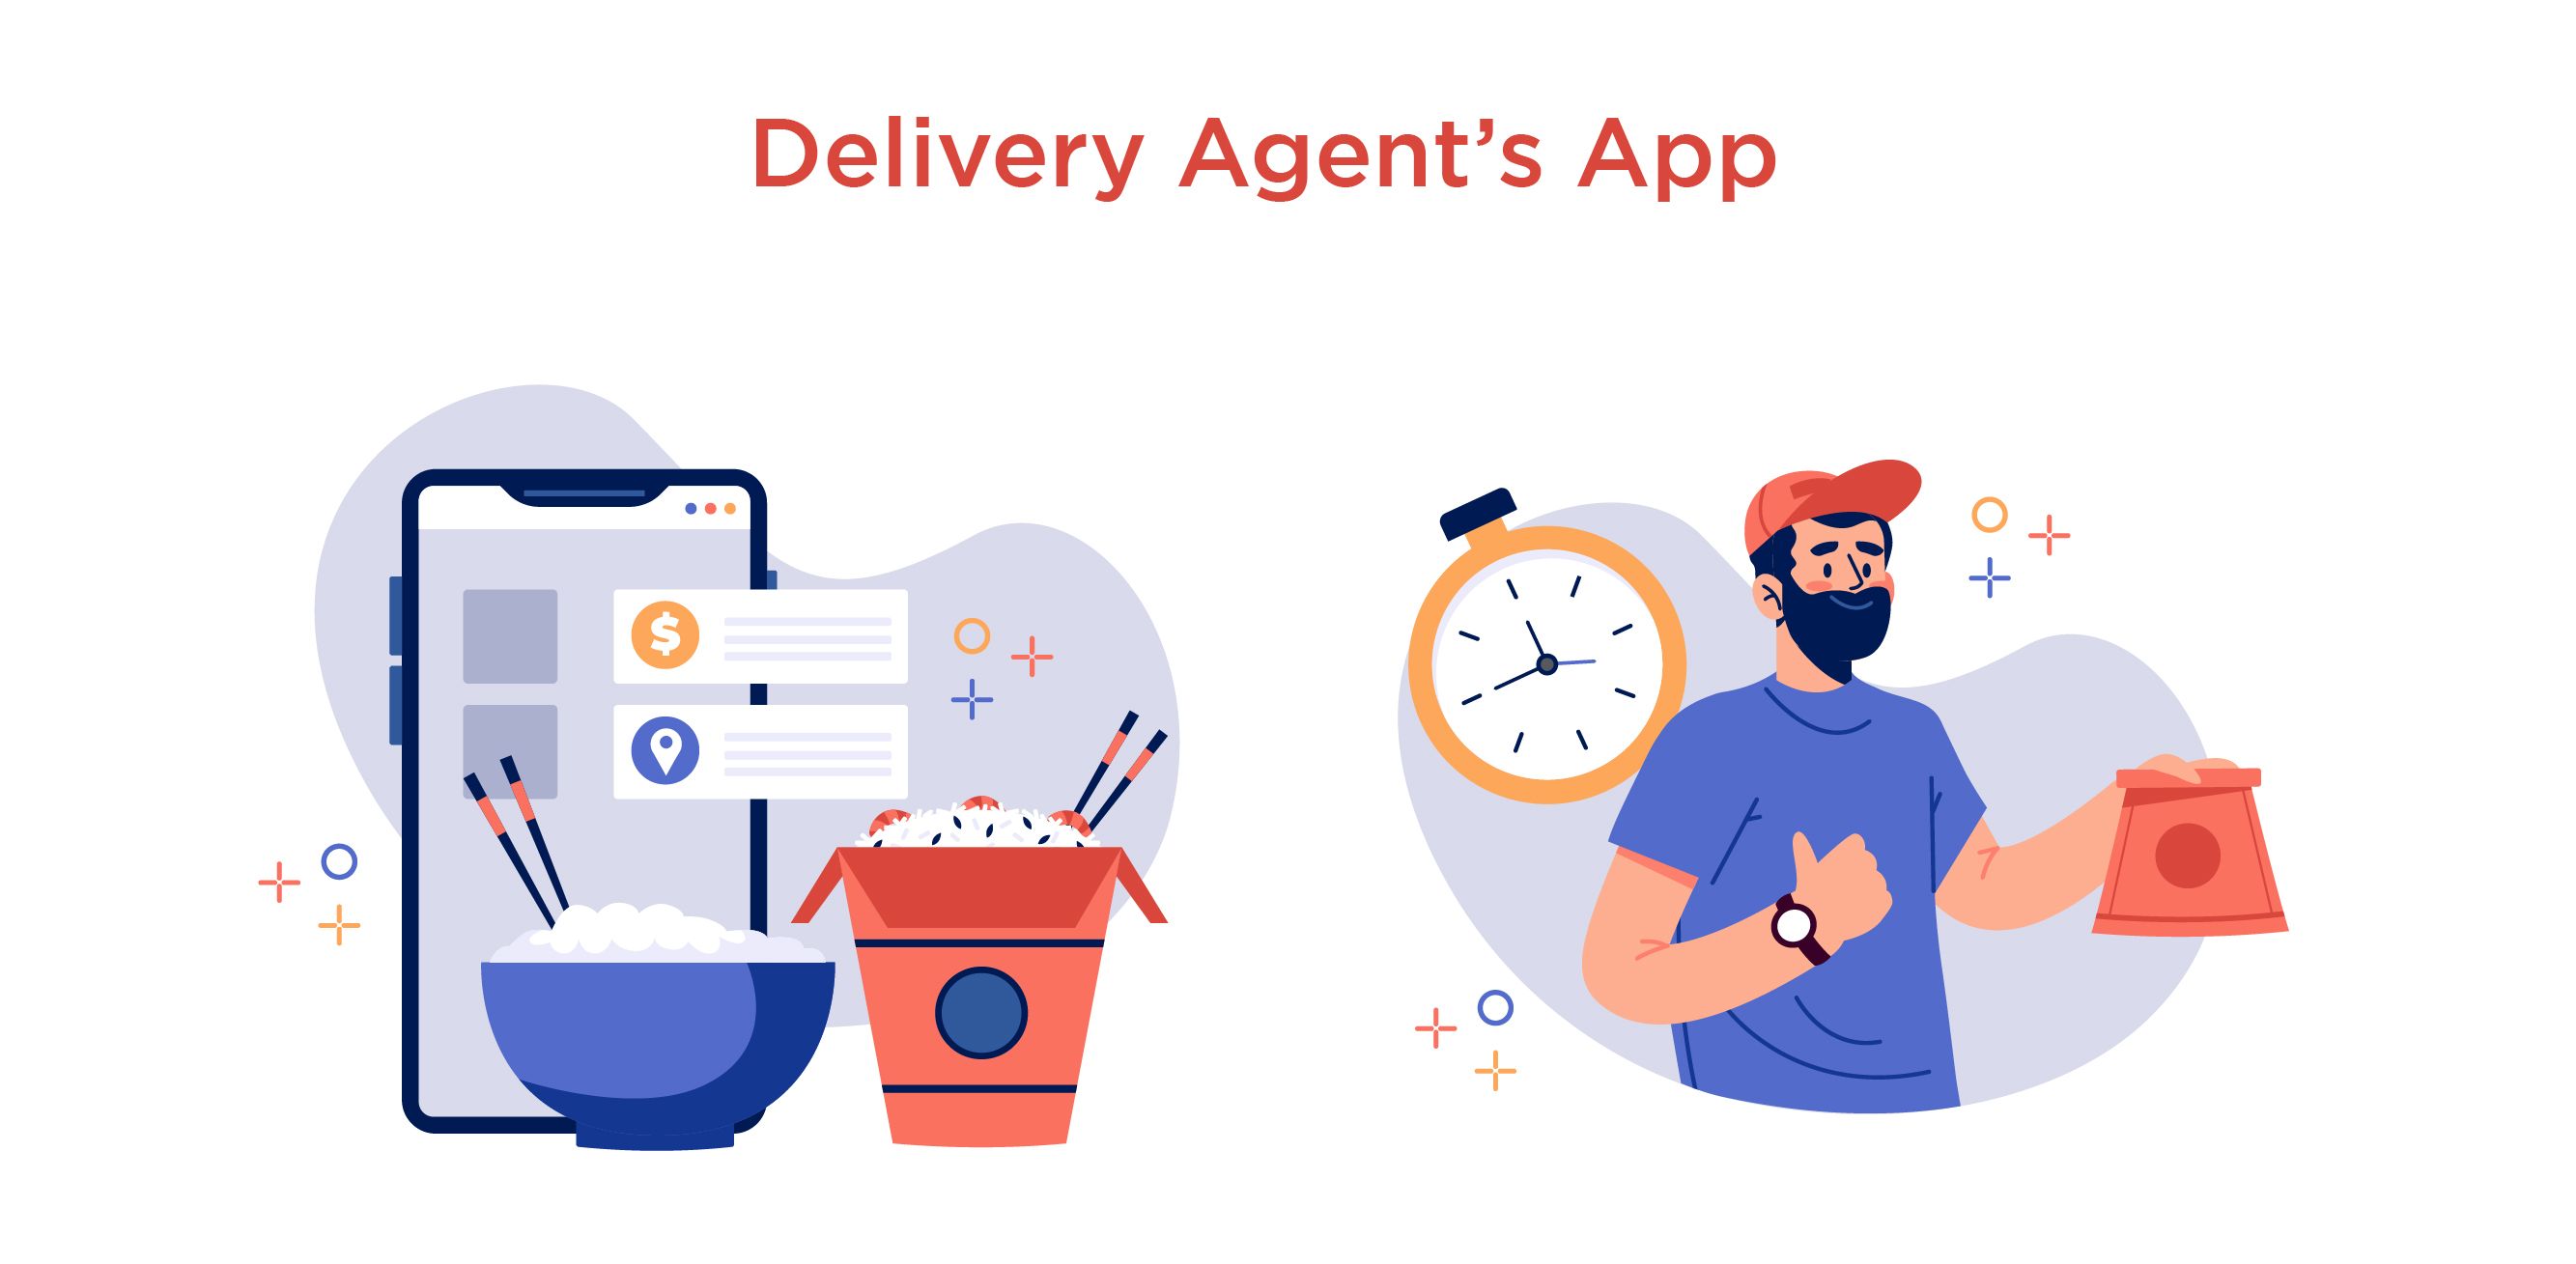 Delivery agent’s App